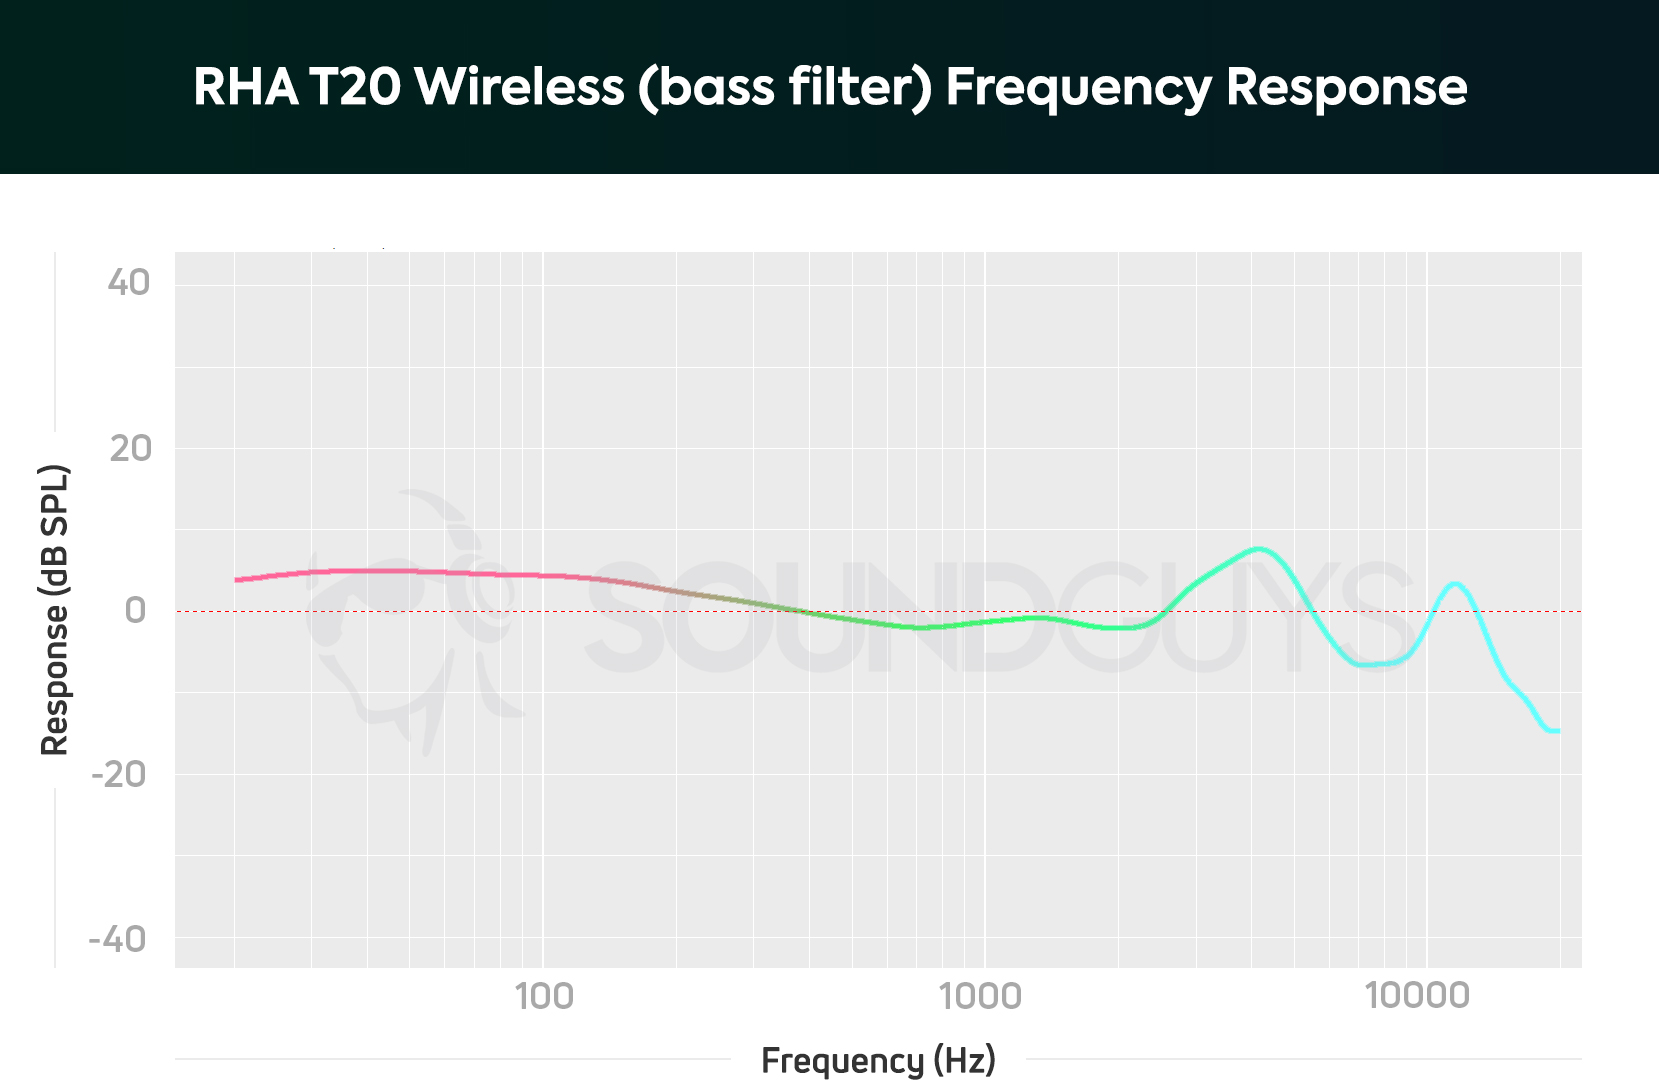 RHA T20 Wireless frequency response chart with the bass filter installed.